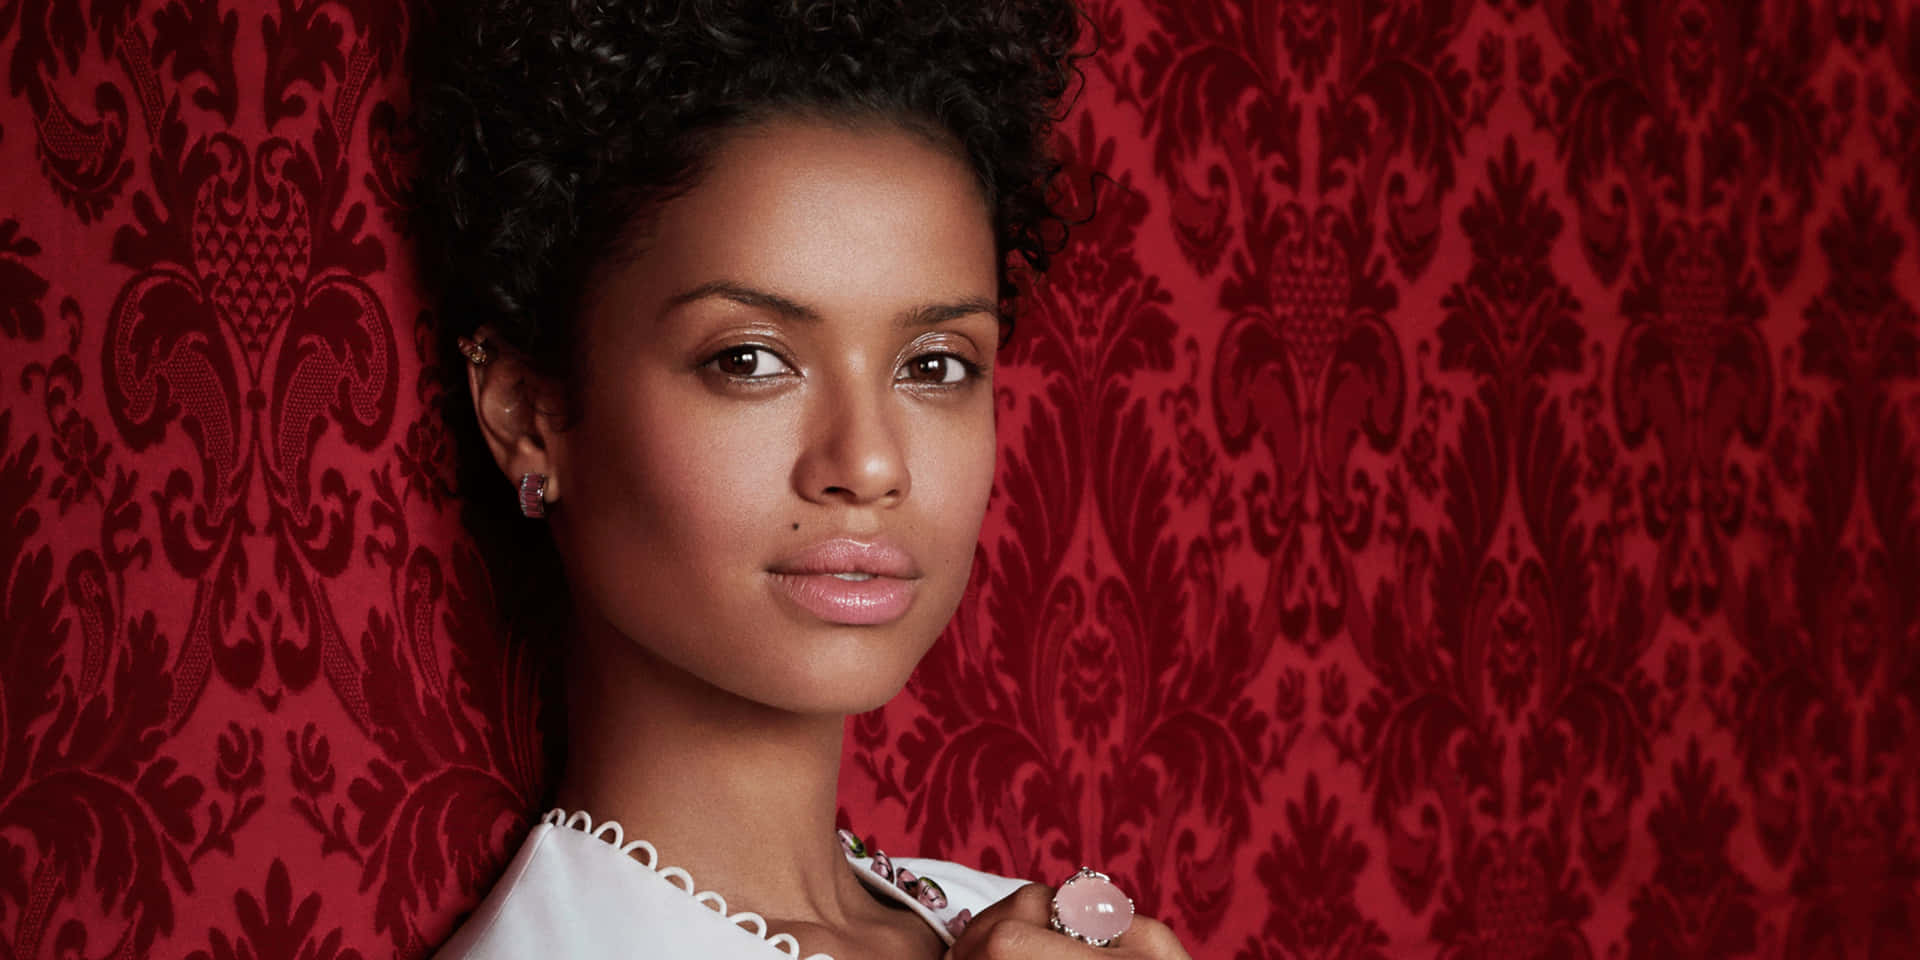 Gugu Mbatha-Raw striking a pose in a stunning photoshoot. Wallpaper